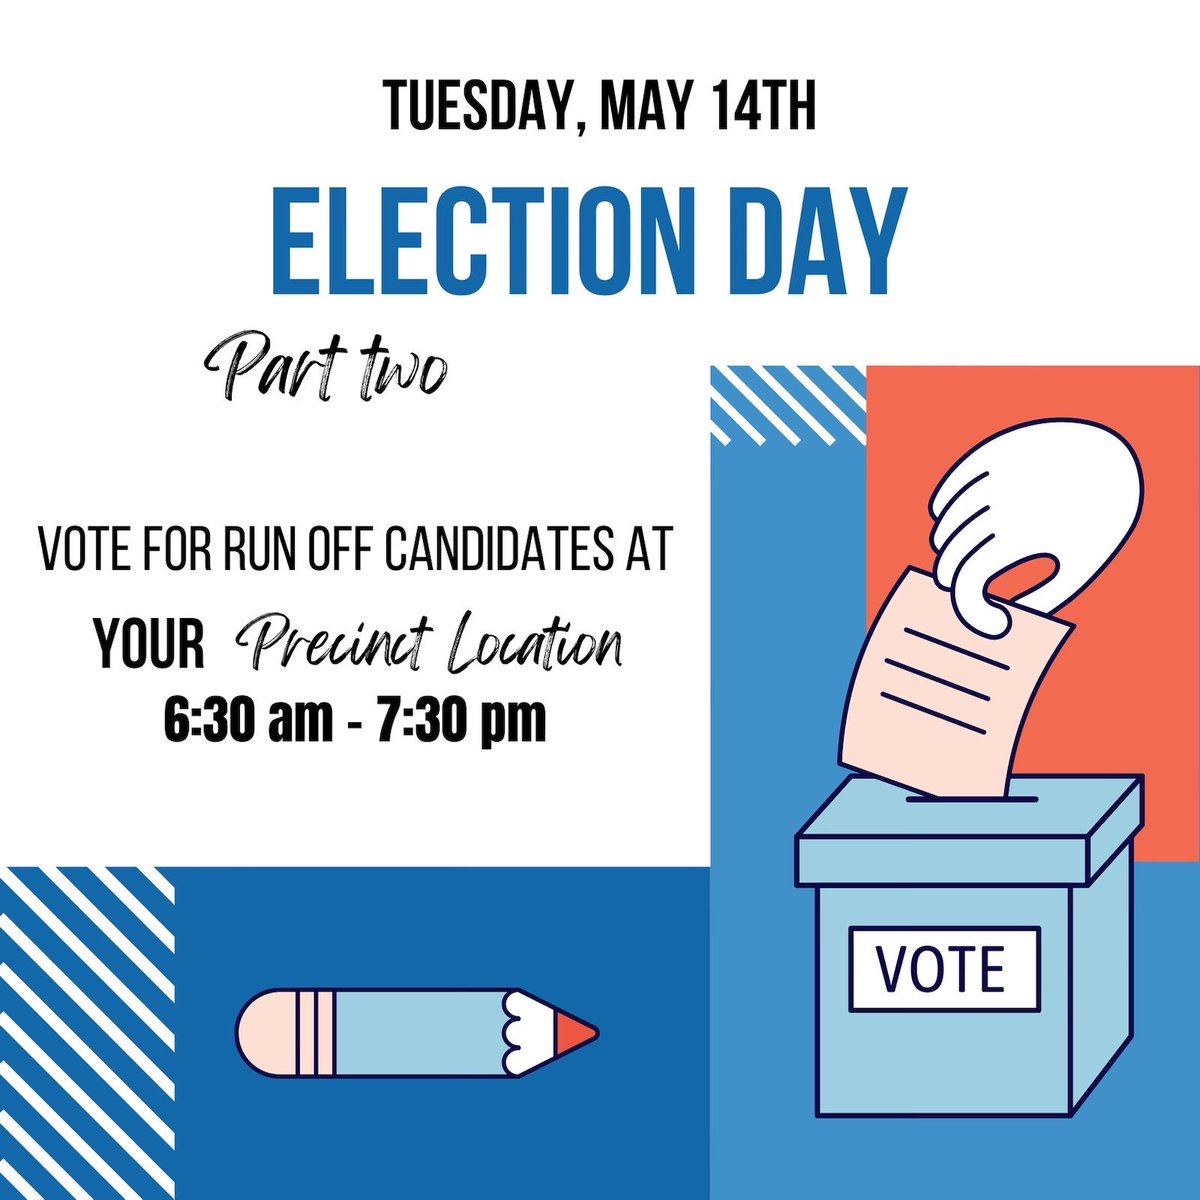 Primary Election Day, Part 2! Two statewide races - and a congressional race for those of you in District 13 - are yet to be decided. If you haven't already, please get out and vote today!  

Find your voting location by checking your current voter registration here: